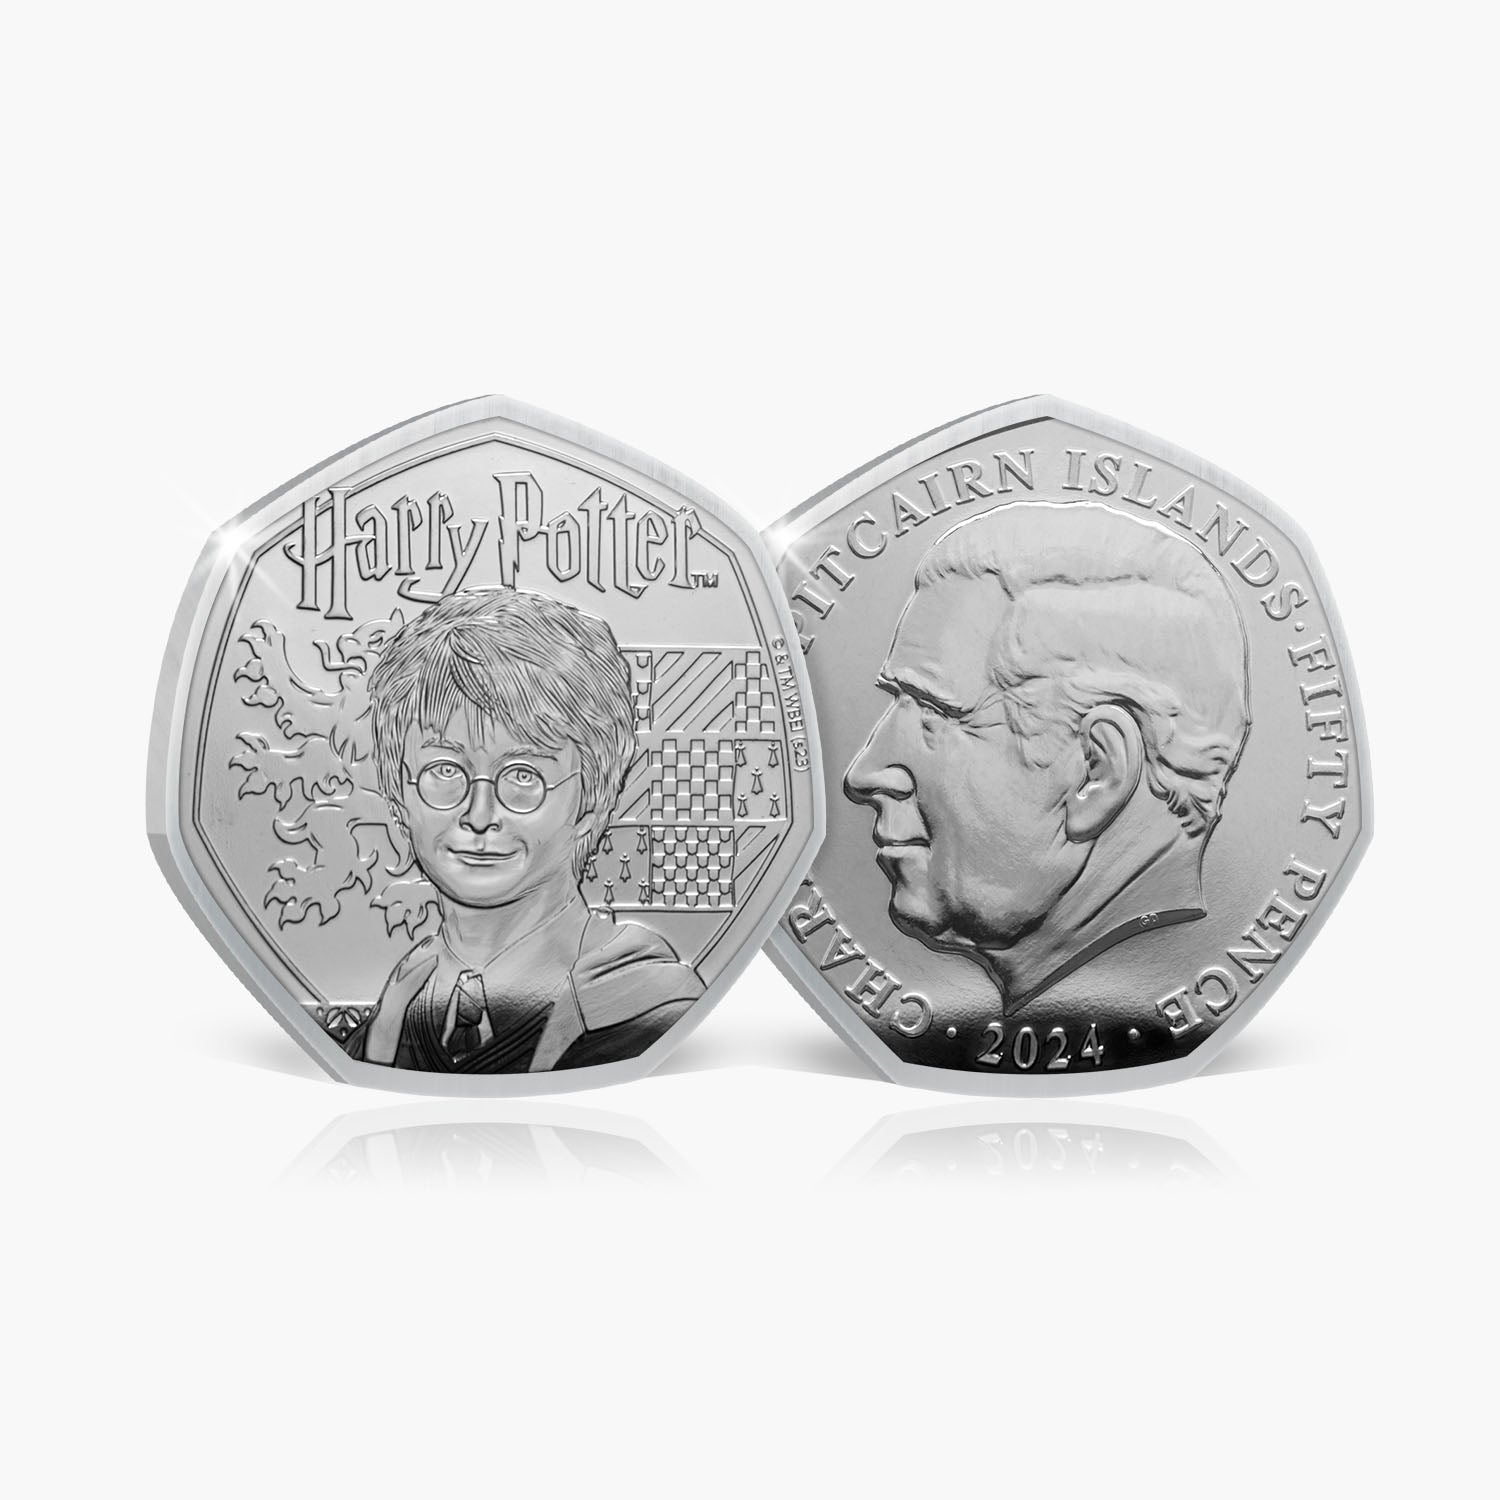 The Official Harry Potter 2024 BU Coin Set